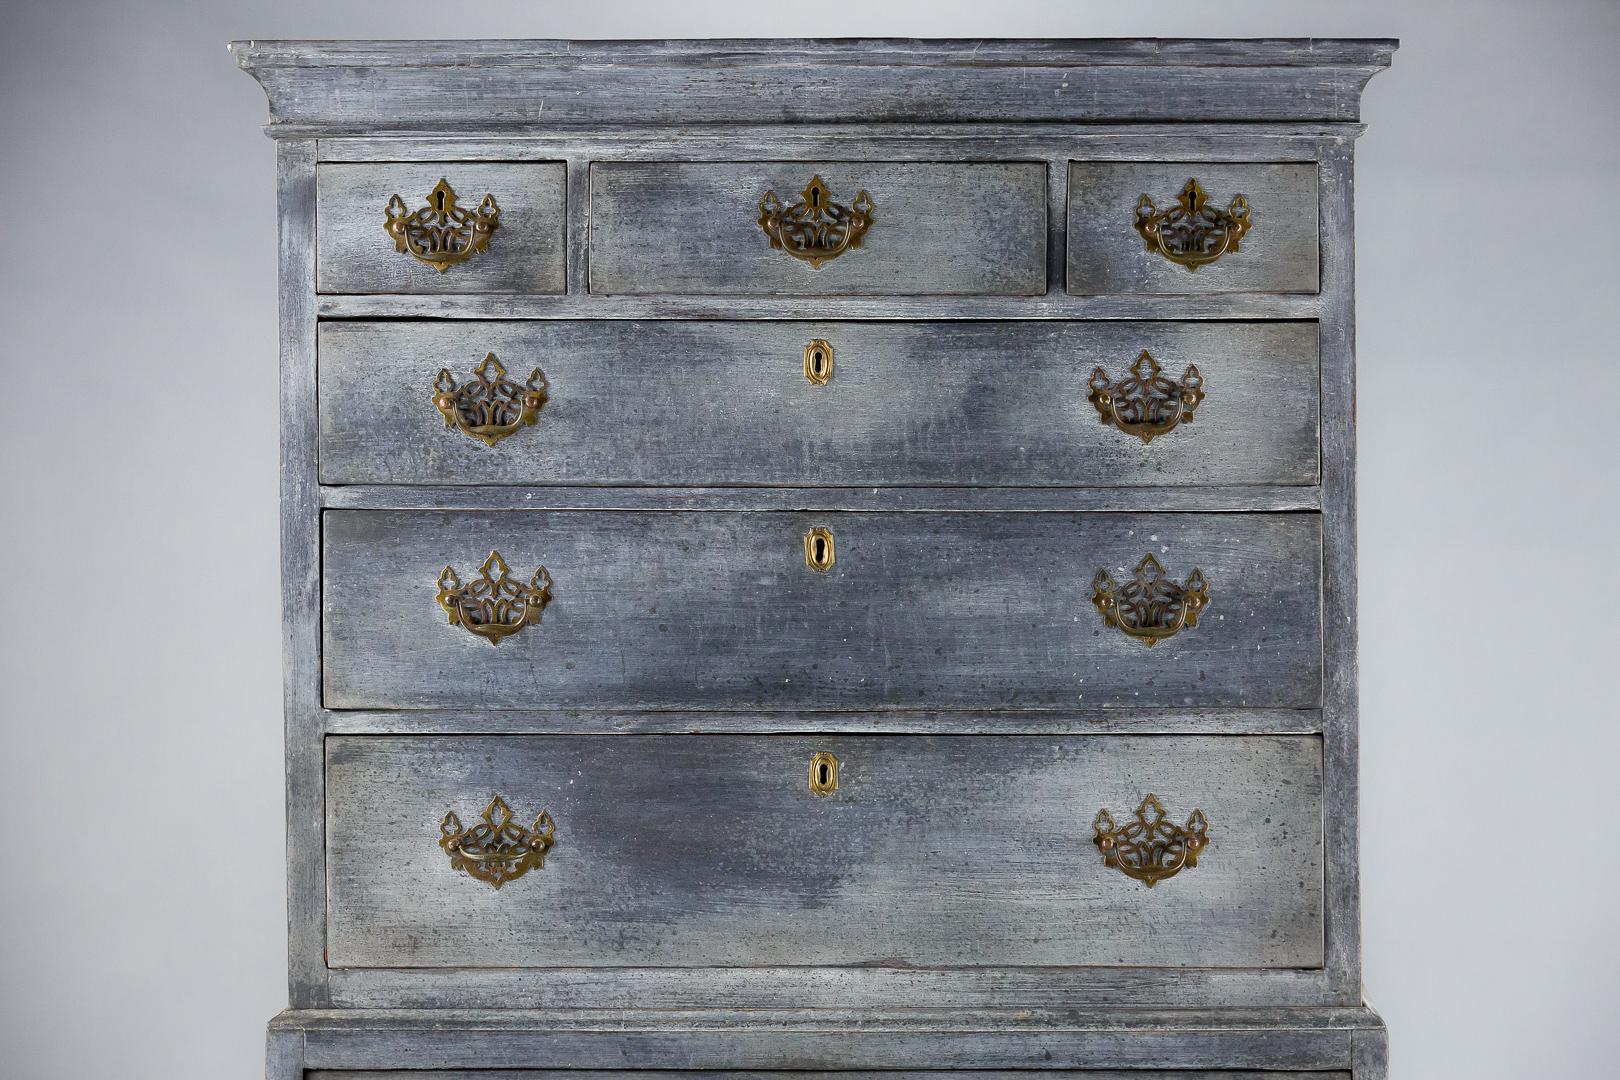 Statuesque English Georgian chest on chest. Later bespoke painted finish, circa 1800.
Dimensions: 103cm x 180cm x 53cm.